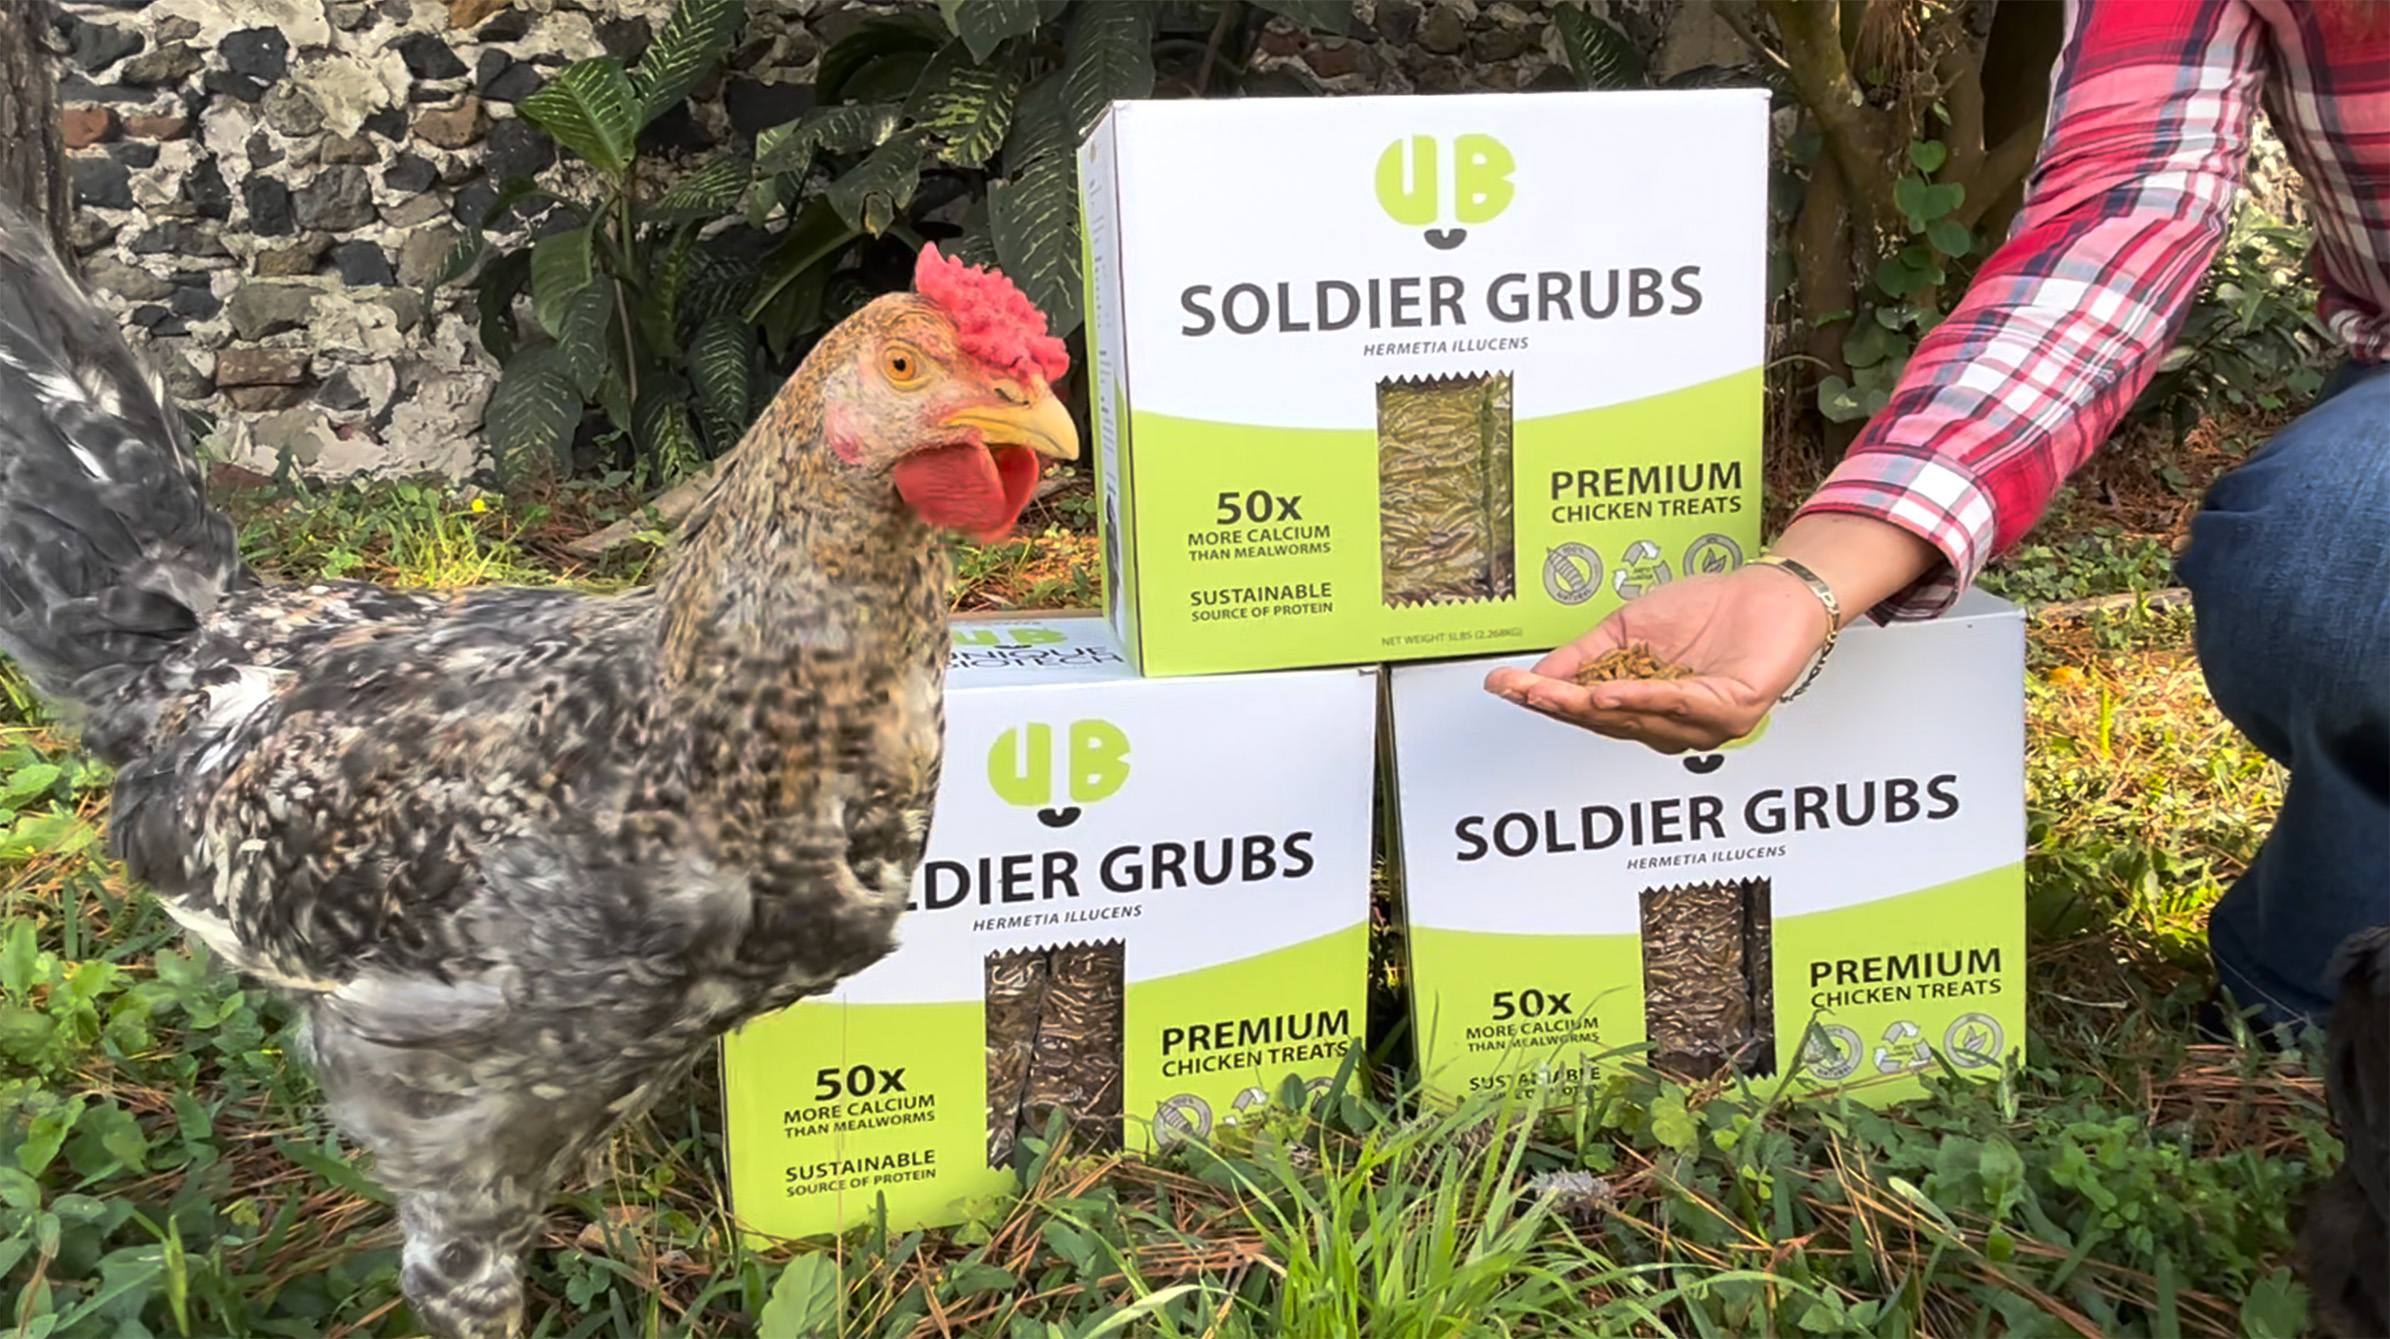 UB soldier grubs fed by hand to chickens